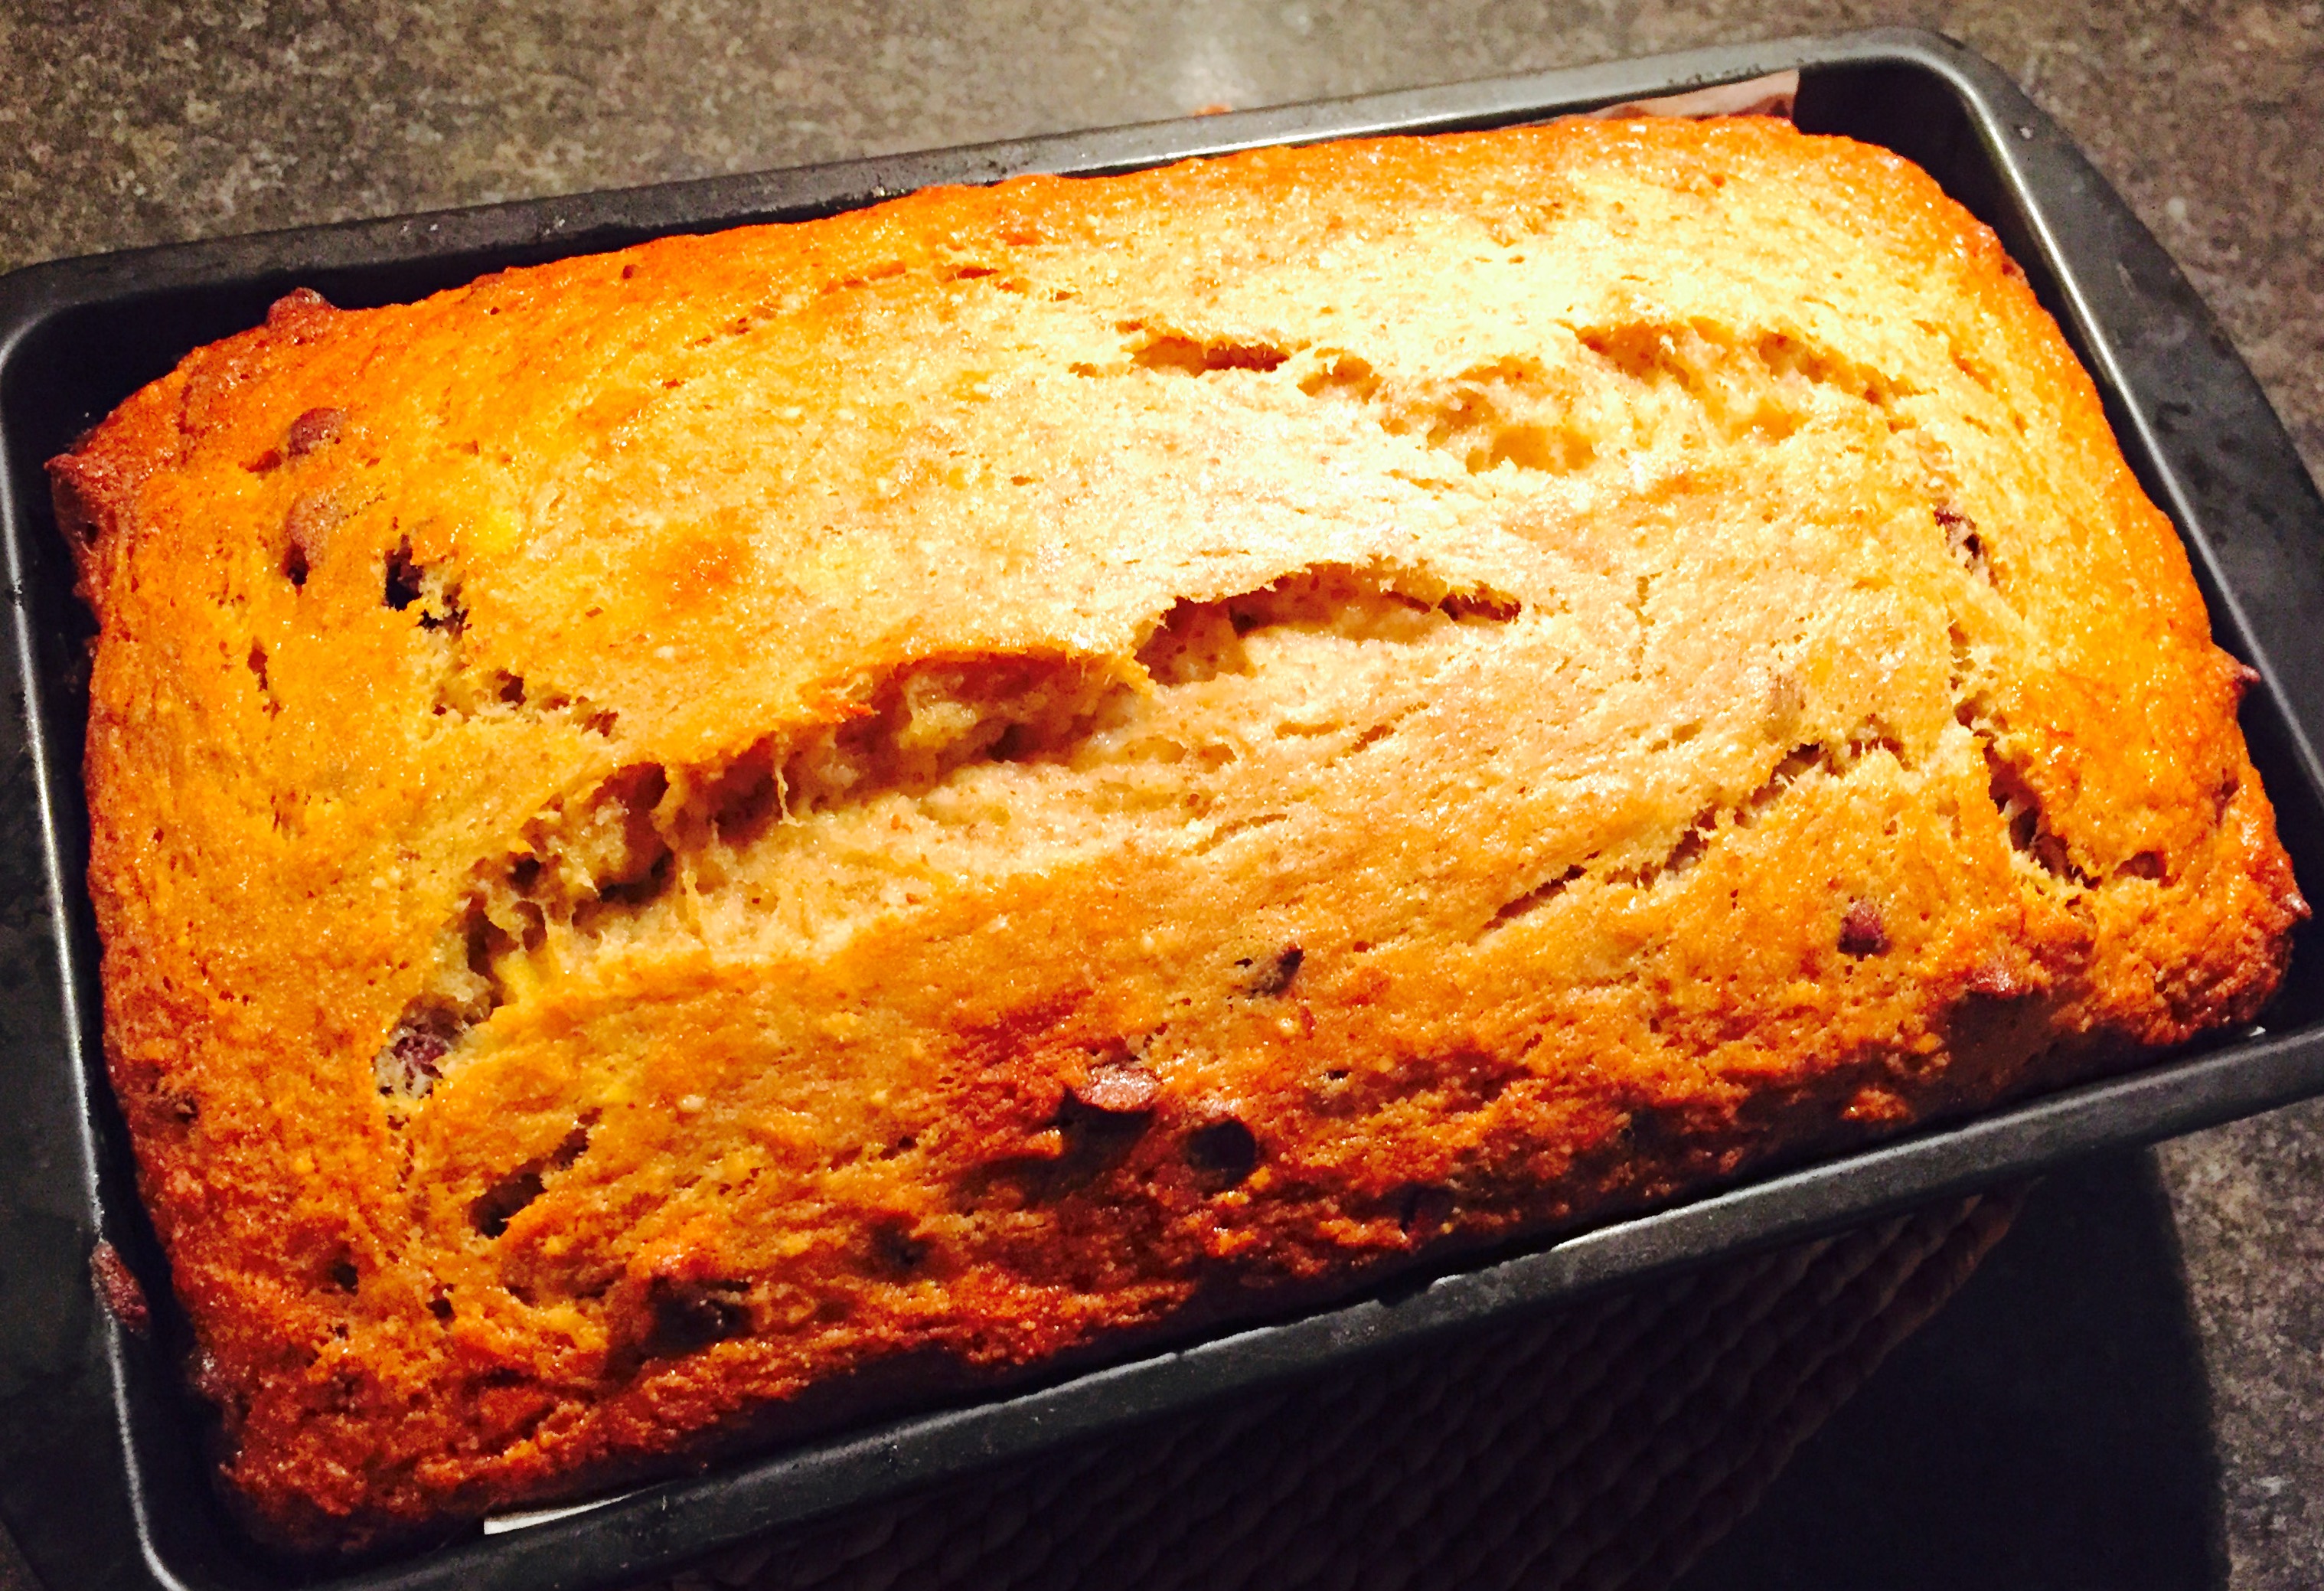 Gorgeous looking banana bread right out of the oven ... you almost forget how allergen friendly it is